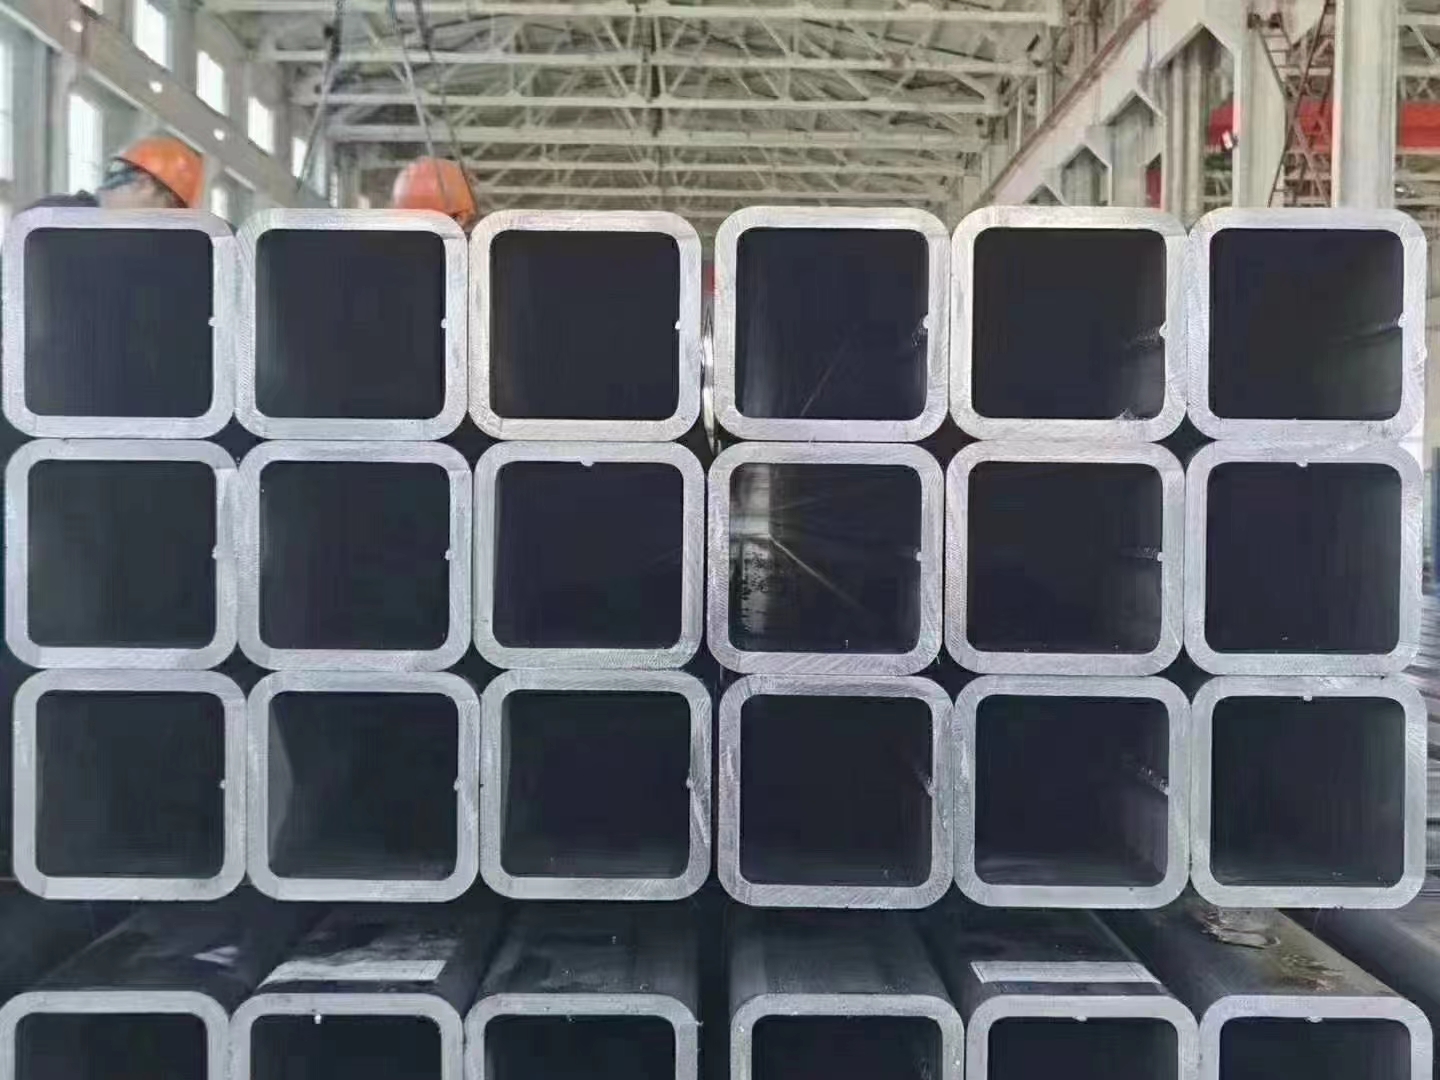 ASTM A270 A554 SS304 316L 316 310S 440 1.4301 321 904L 201 China Factory High Quality Square Welded Stainless Pipe